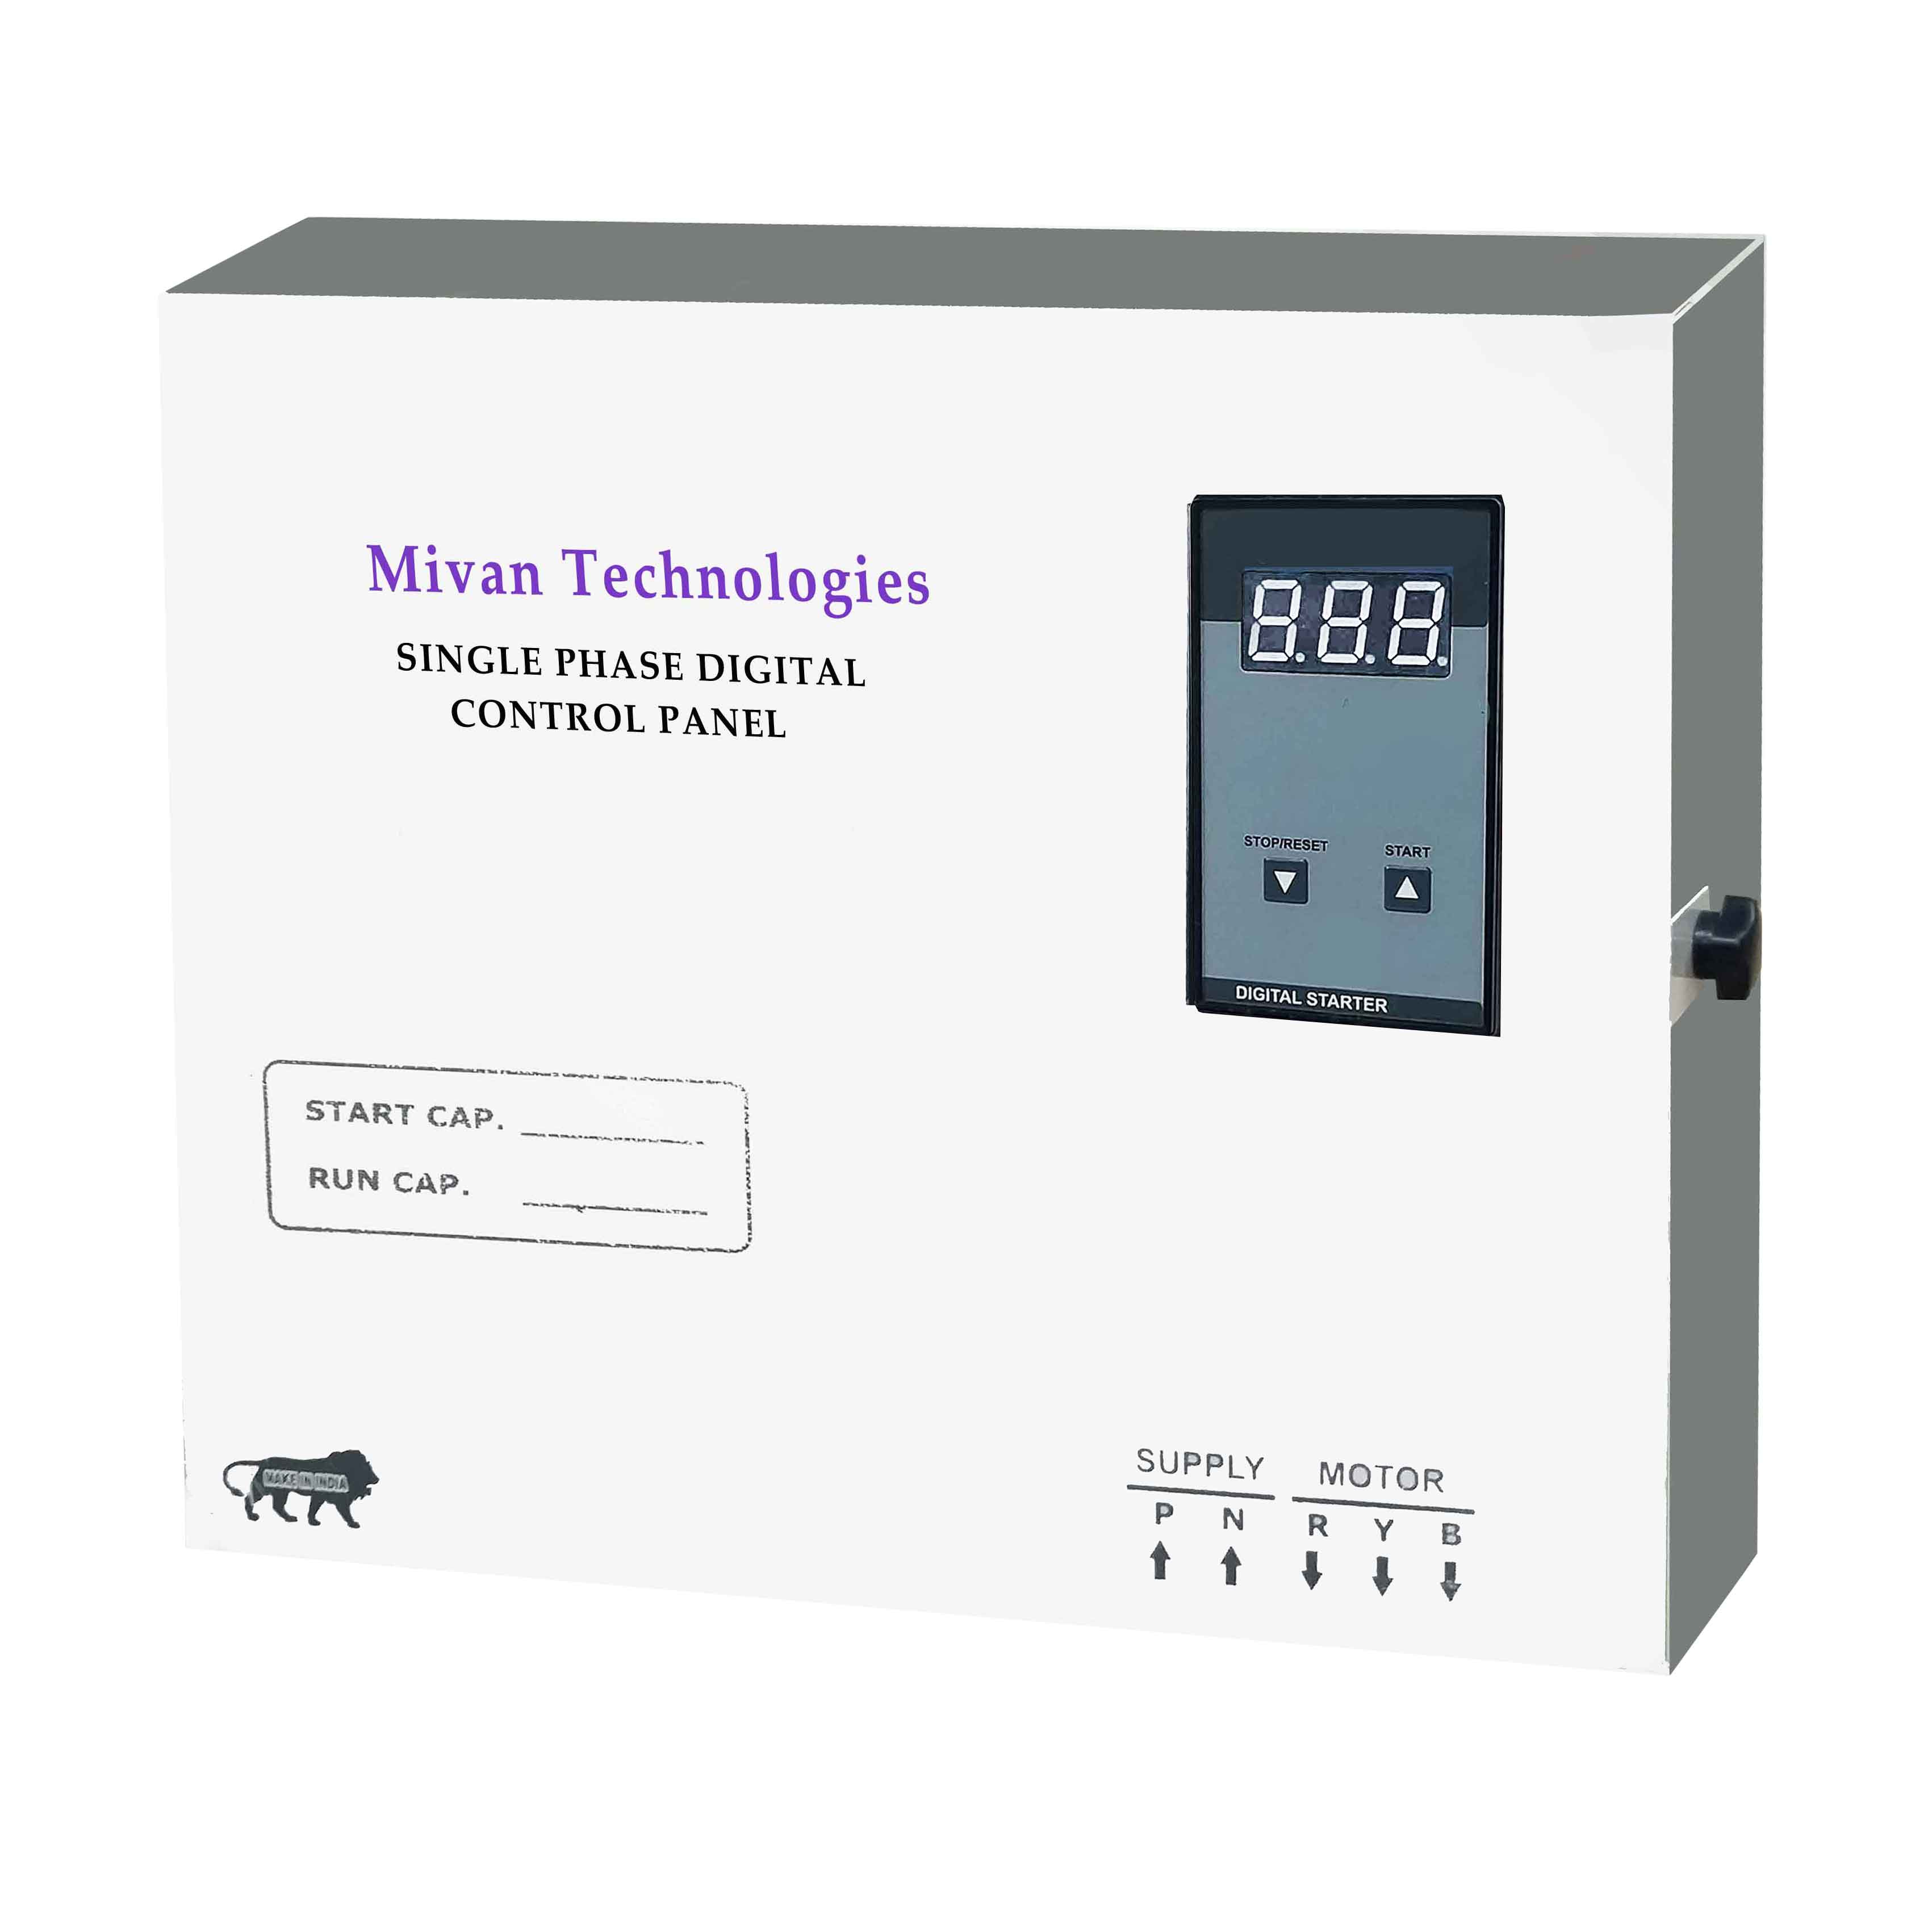 DVA SR for 2 HP motor Digital starter panel with volt and amp miter with start and run capacitor